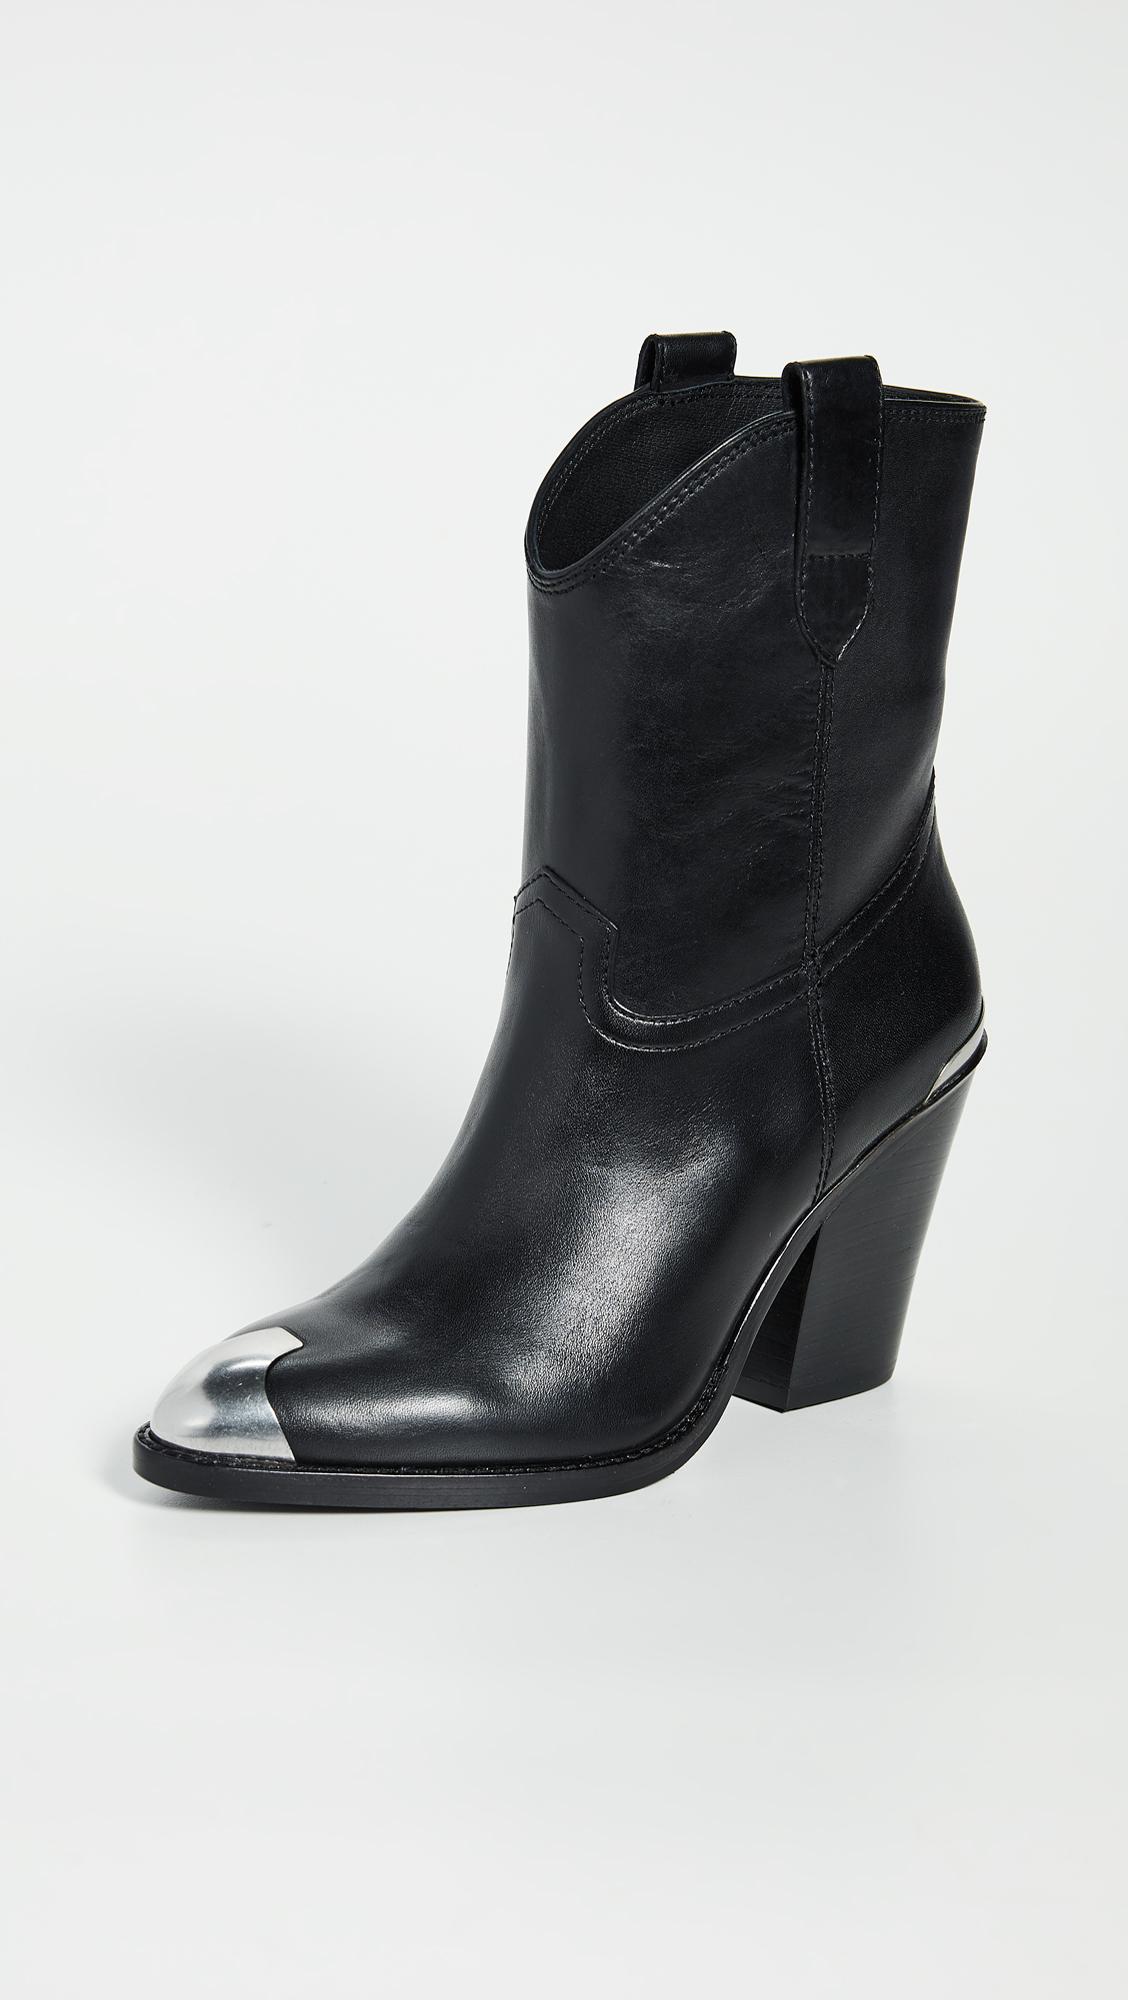 Ash Leather Elvis Boots in Black - Lyst